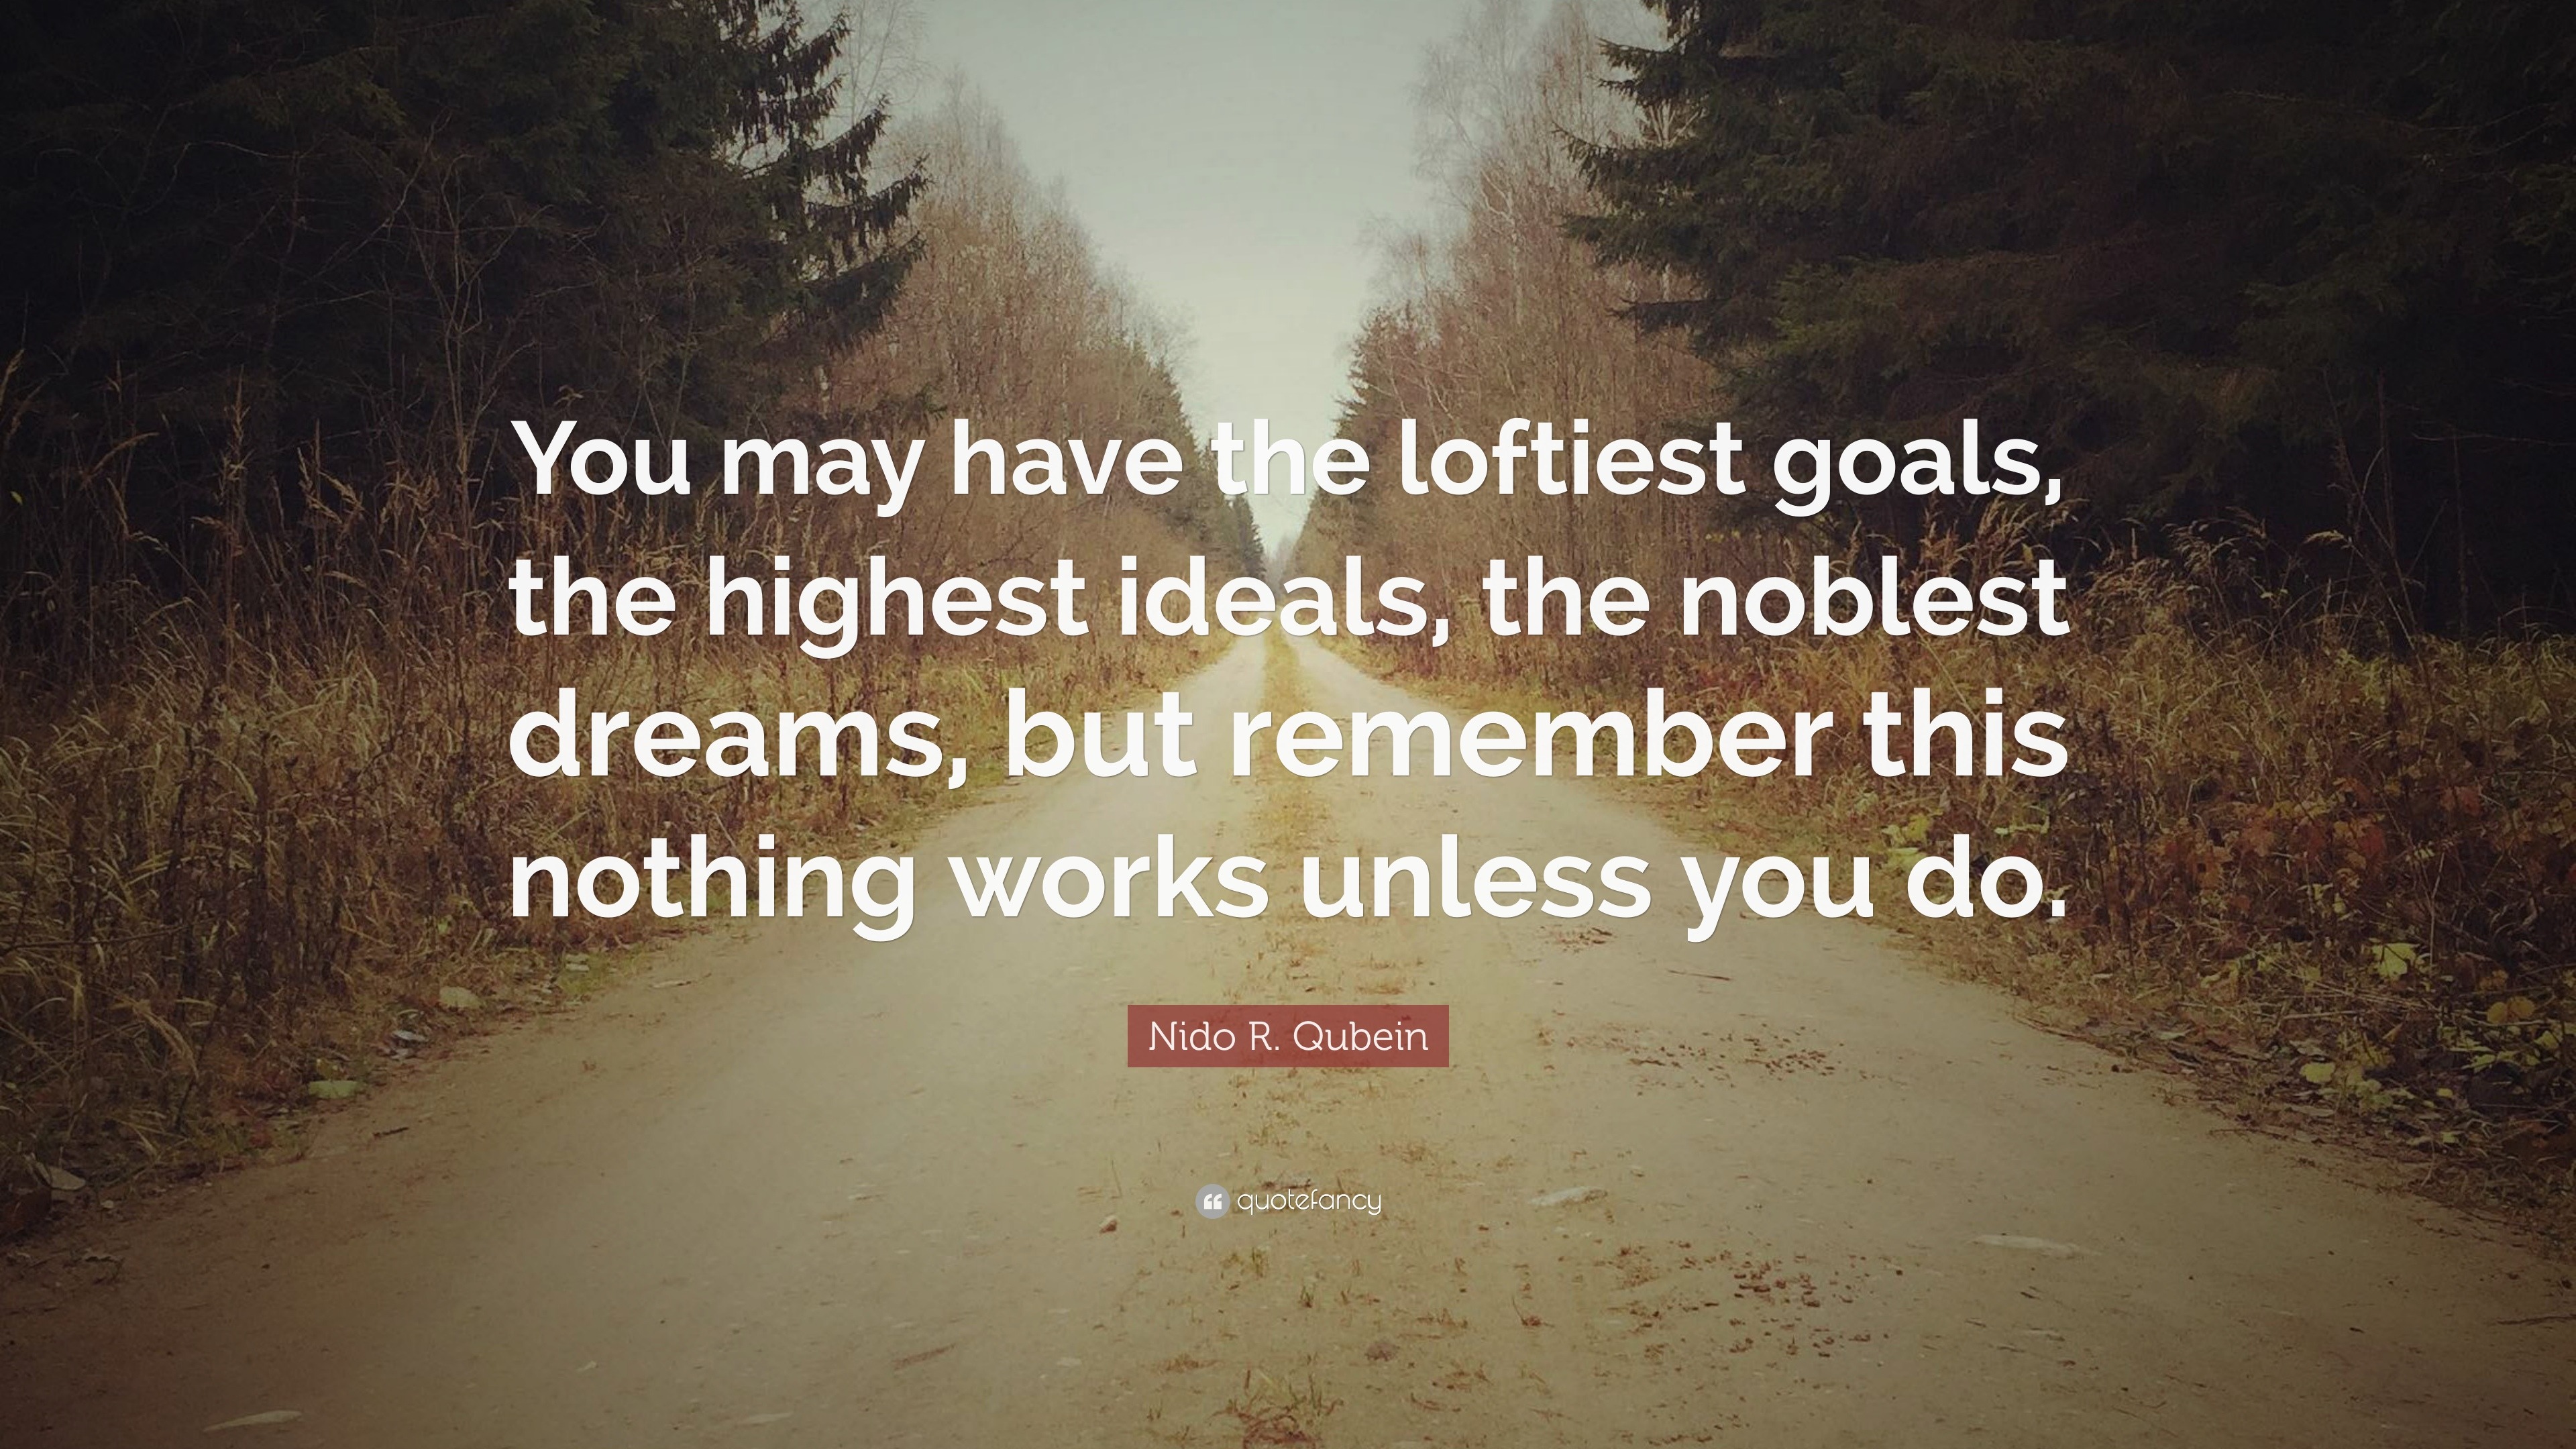 Nido R. Qubein Quote: “You may have the loftiest goals, the highest ...